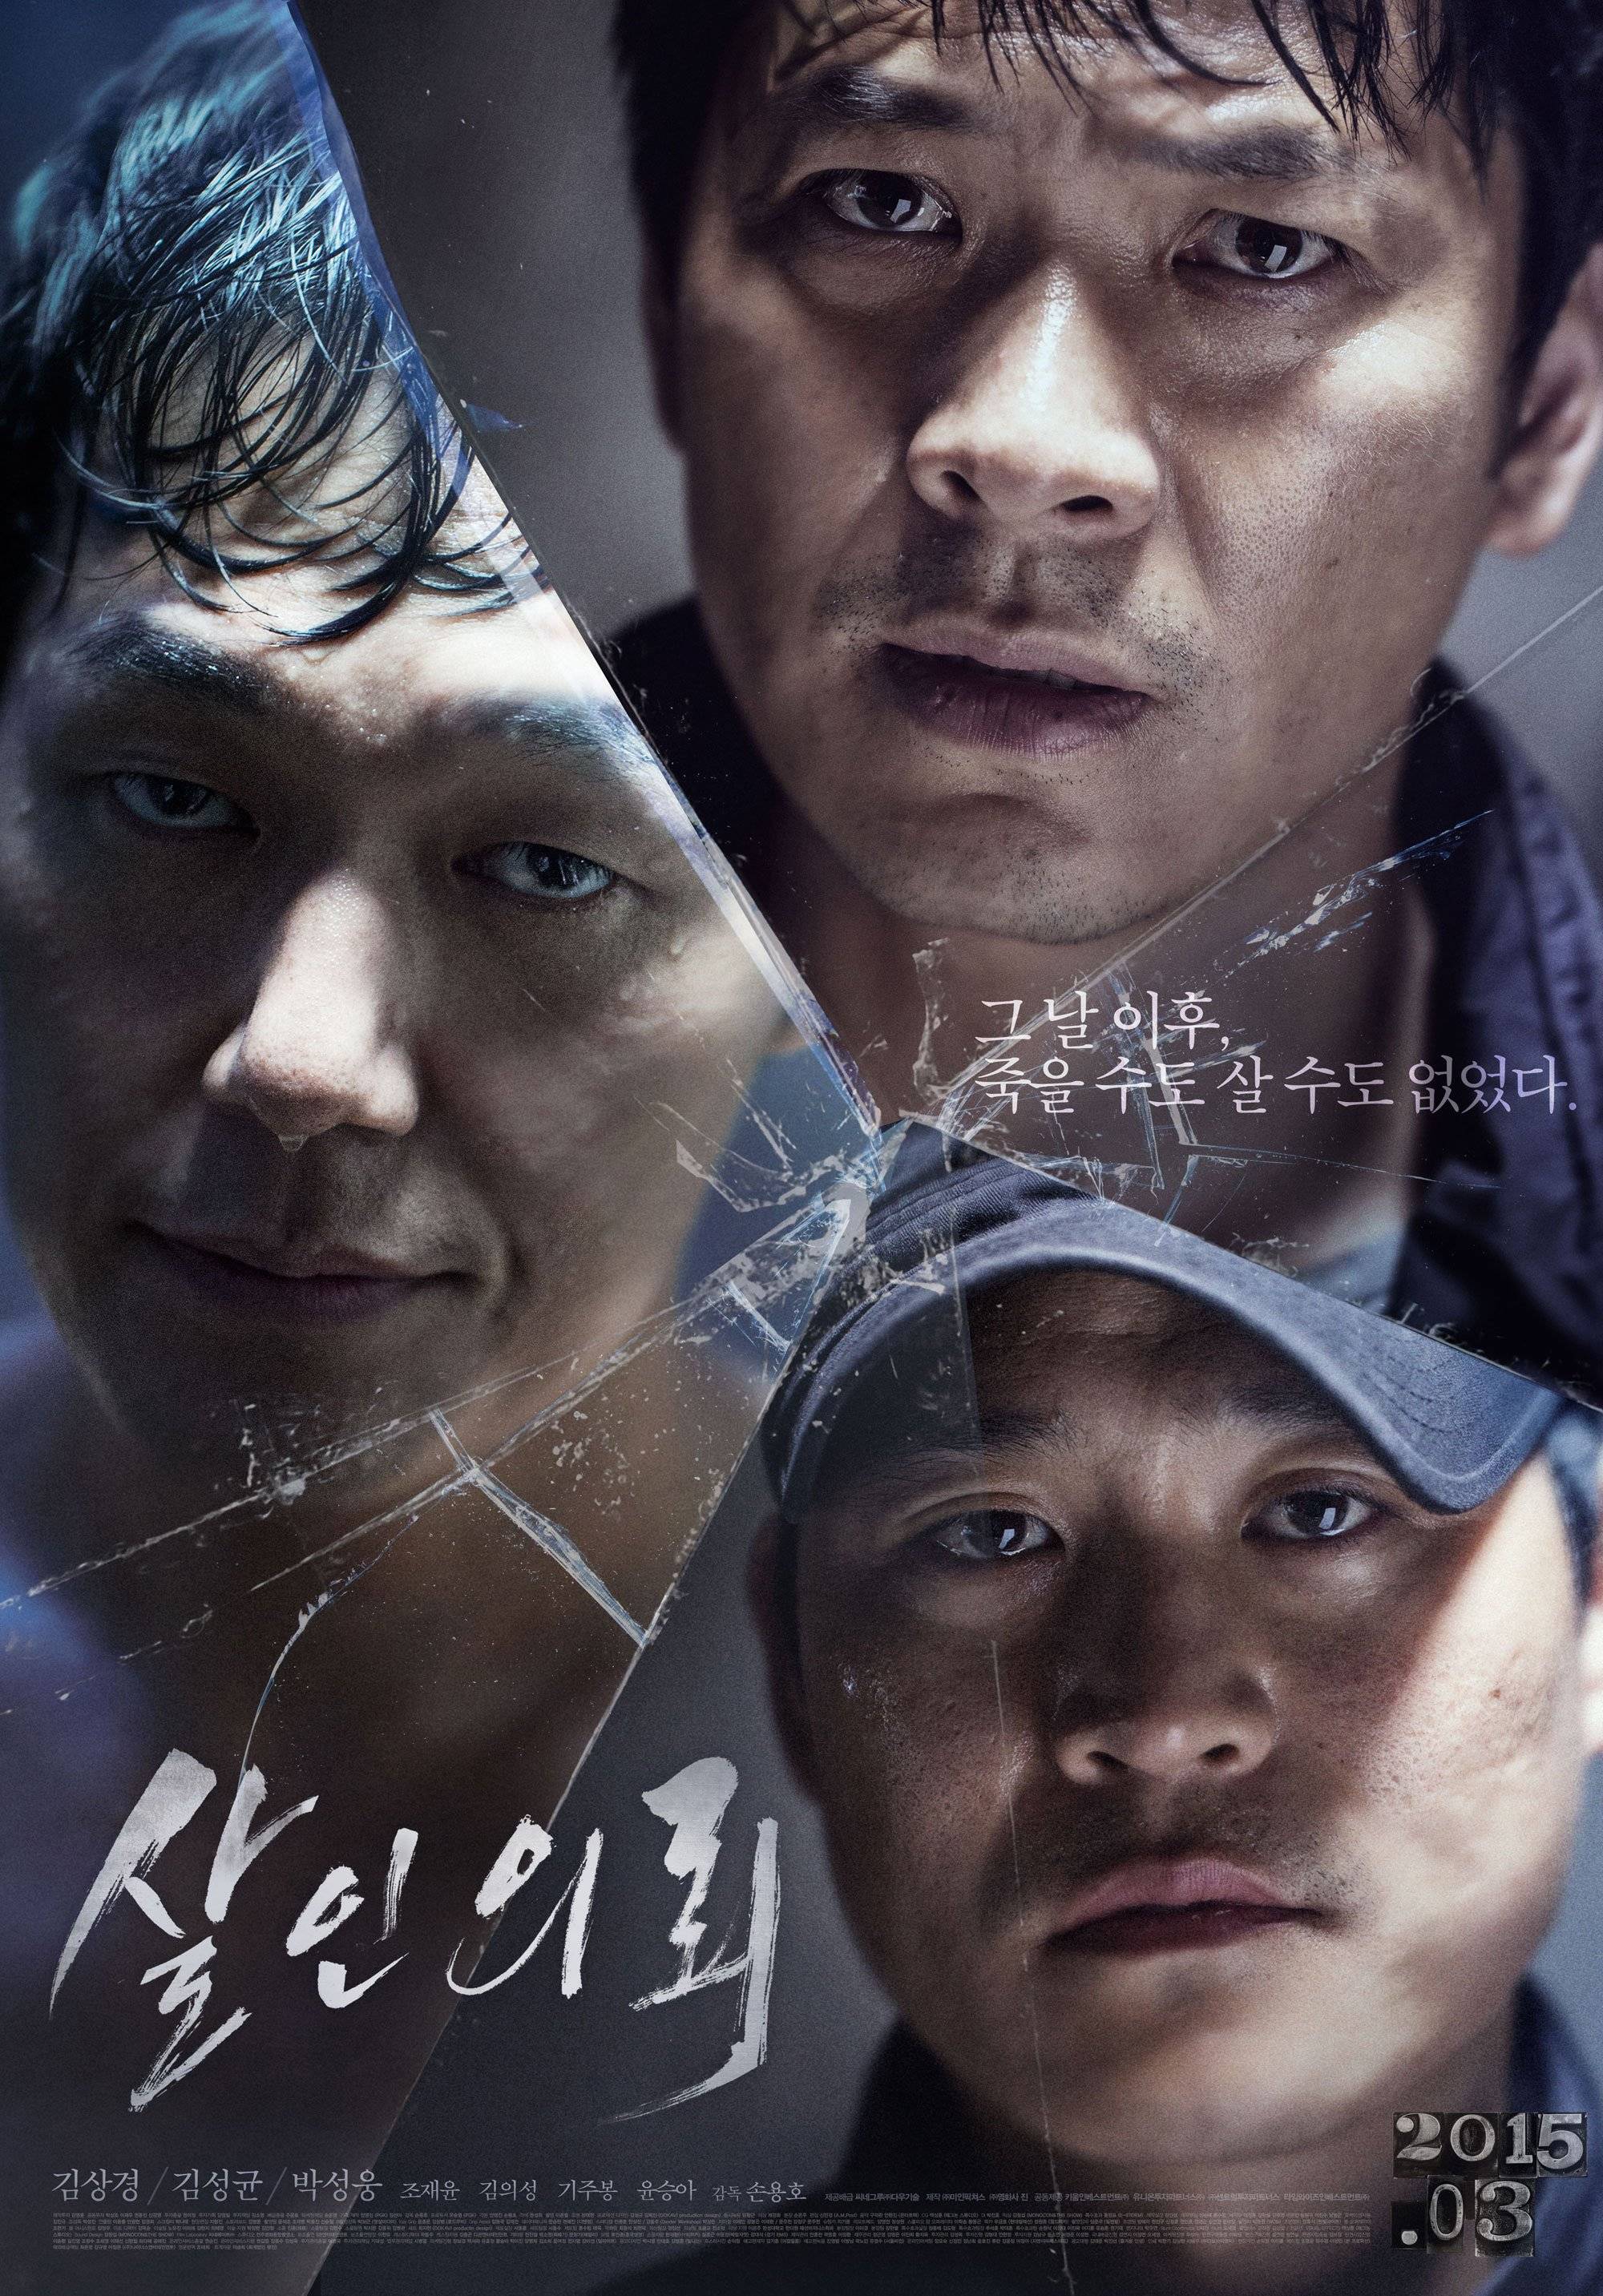 [Photos] Added new poster and press photos for the Korean movie 'The